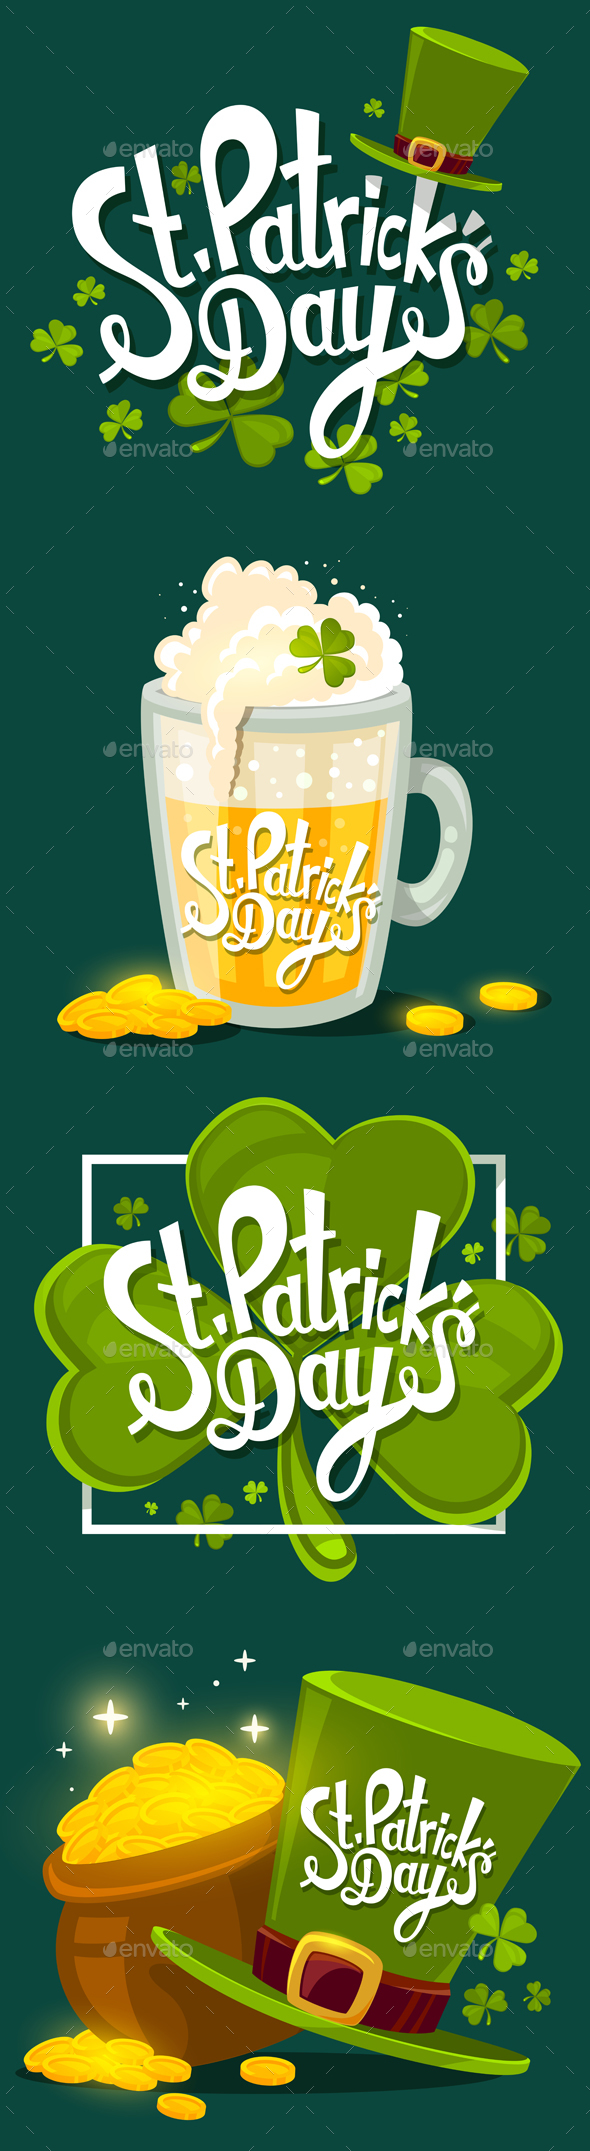 Collection of St. Patrick's Day Greetings